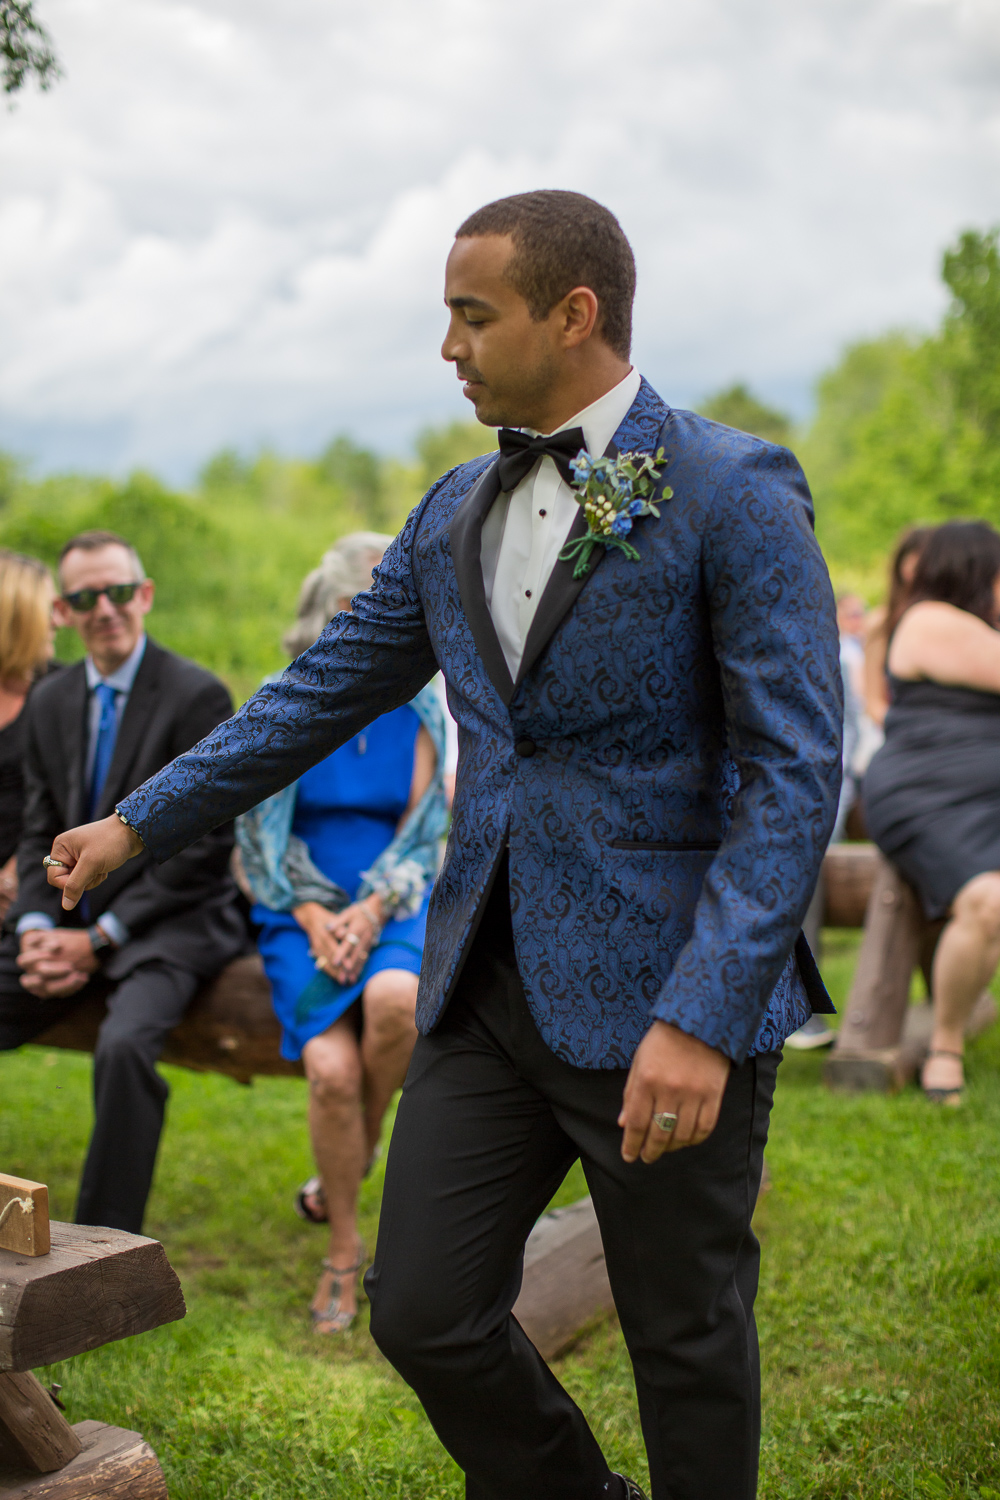 groom fist pumping guest as he walks down the aisle to the ceremony at the perfect day